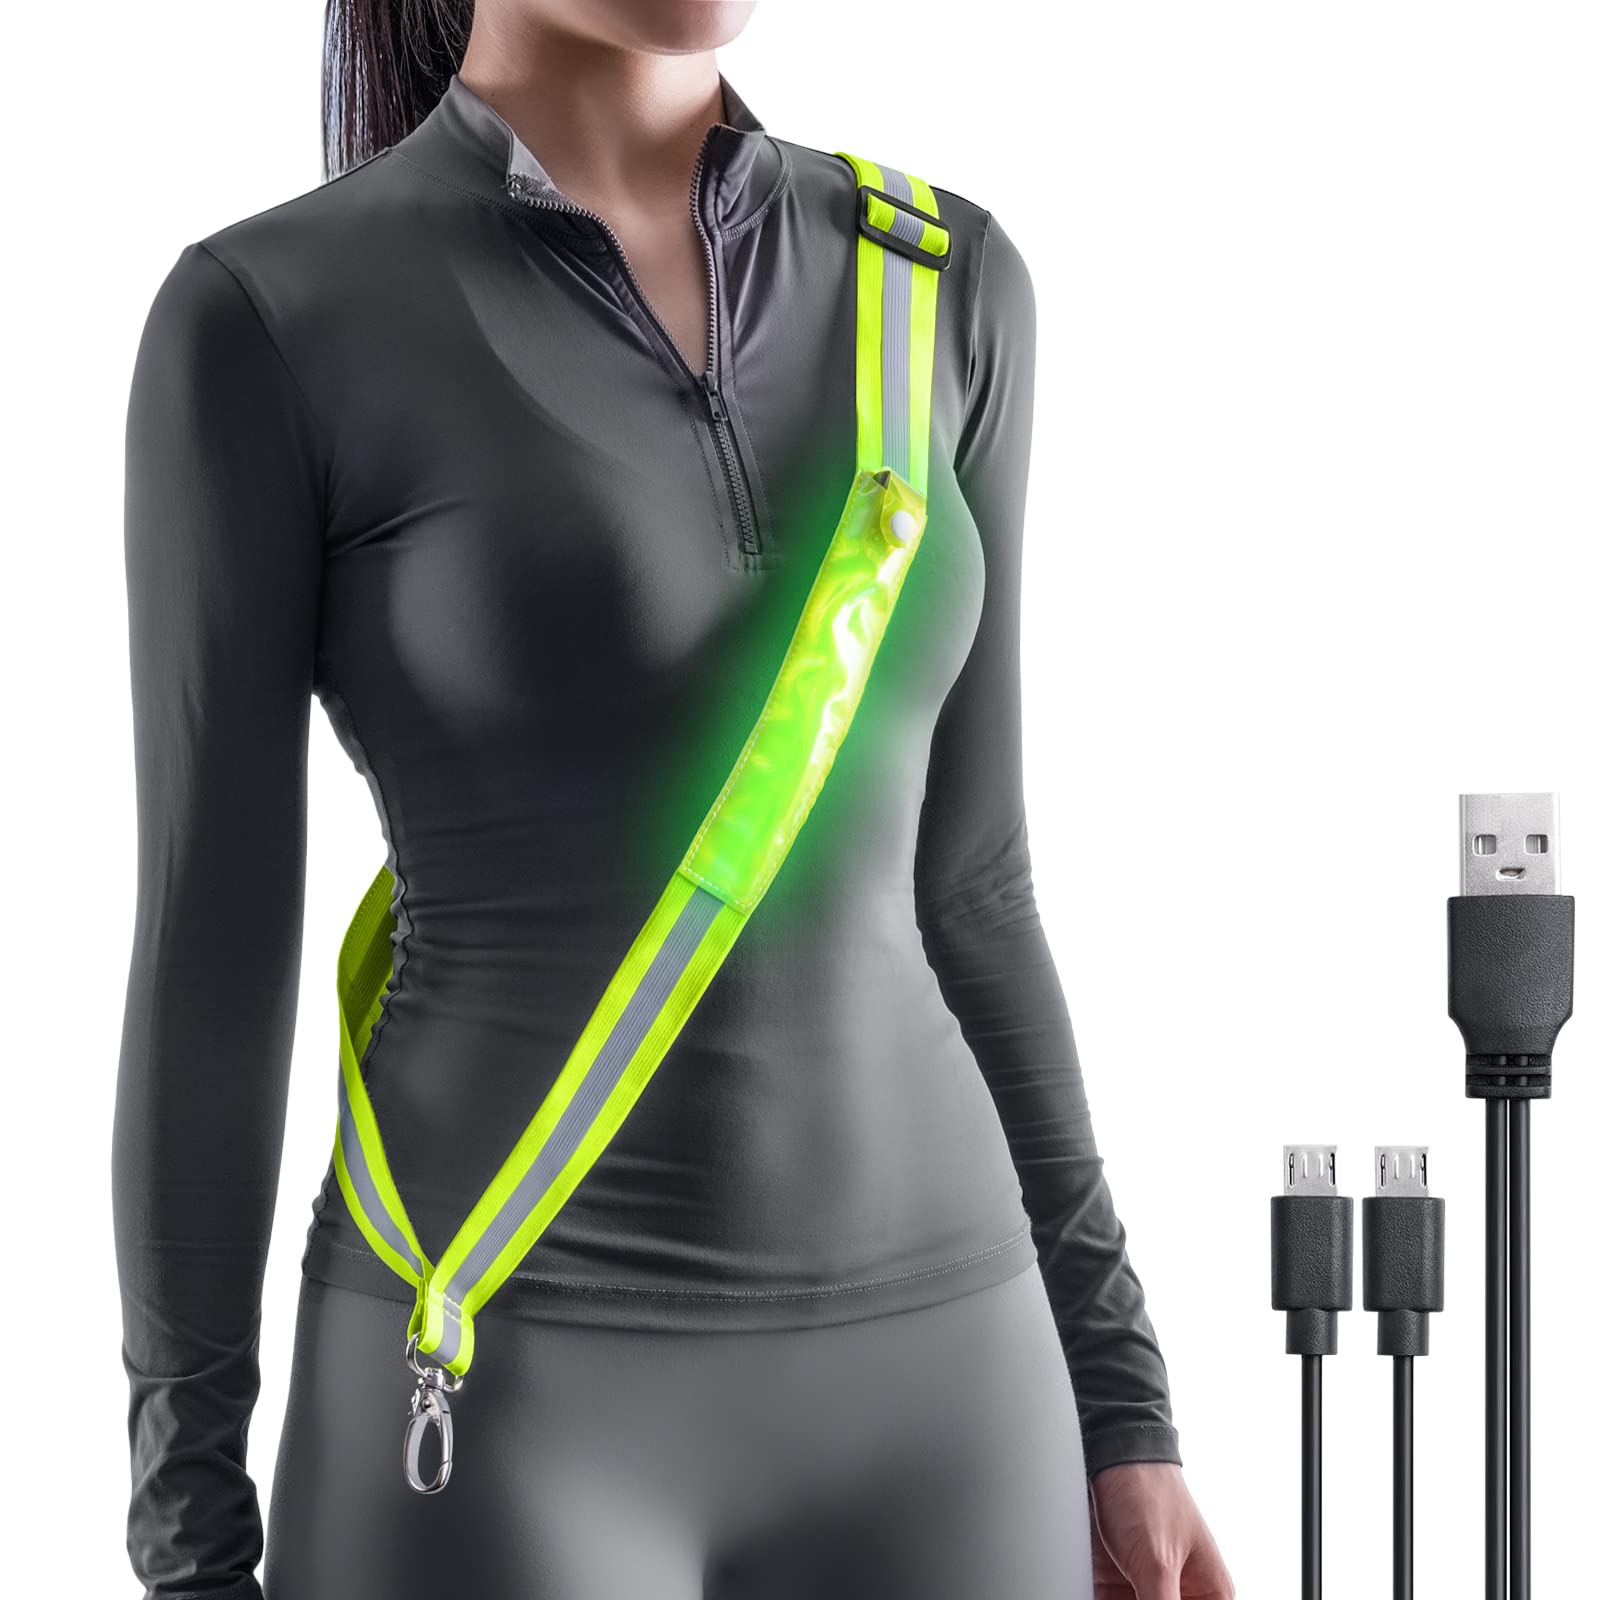 LED Reflective Running Vest, Safety Gear for Night Running